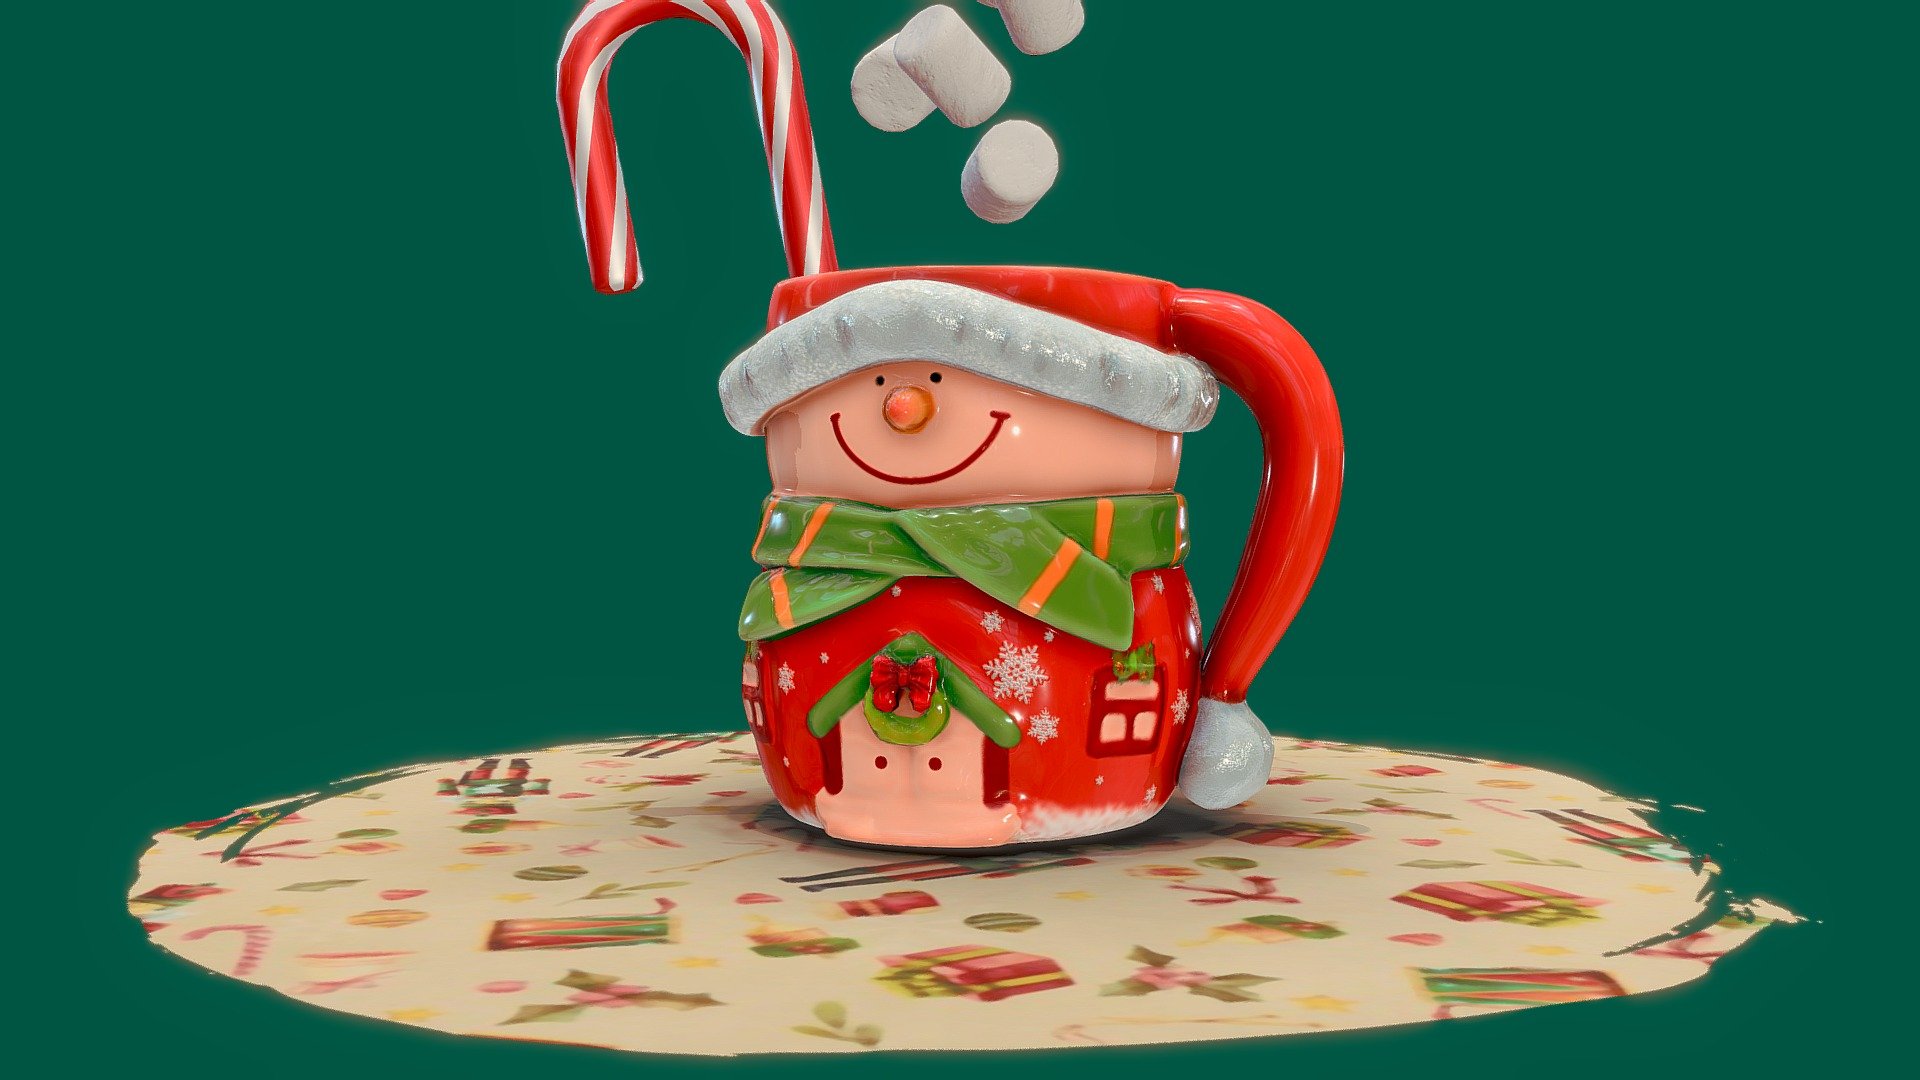 Christmas mug made in Zbrush, Maya, simulation in Cinema 4D
Blender, Maya, MarmosetToolbag, 3Ds Max files with textures attached included.
 - Christmas mug - Buy Royalty Free 3D model by naira001 3d model